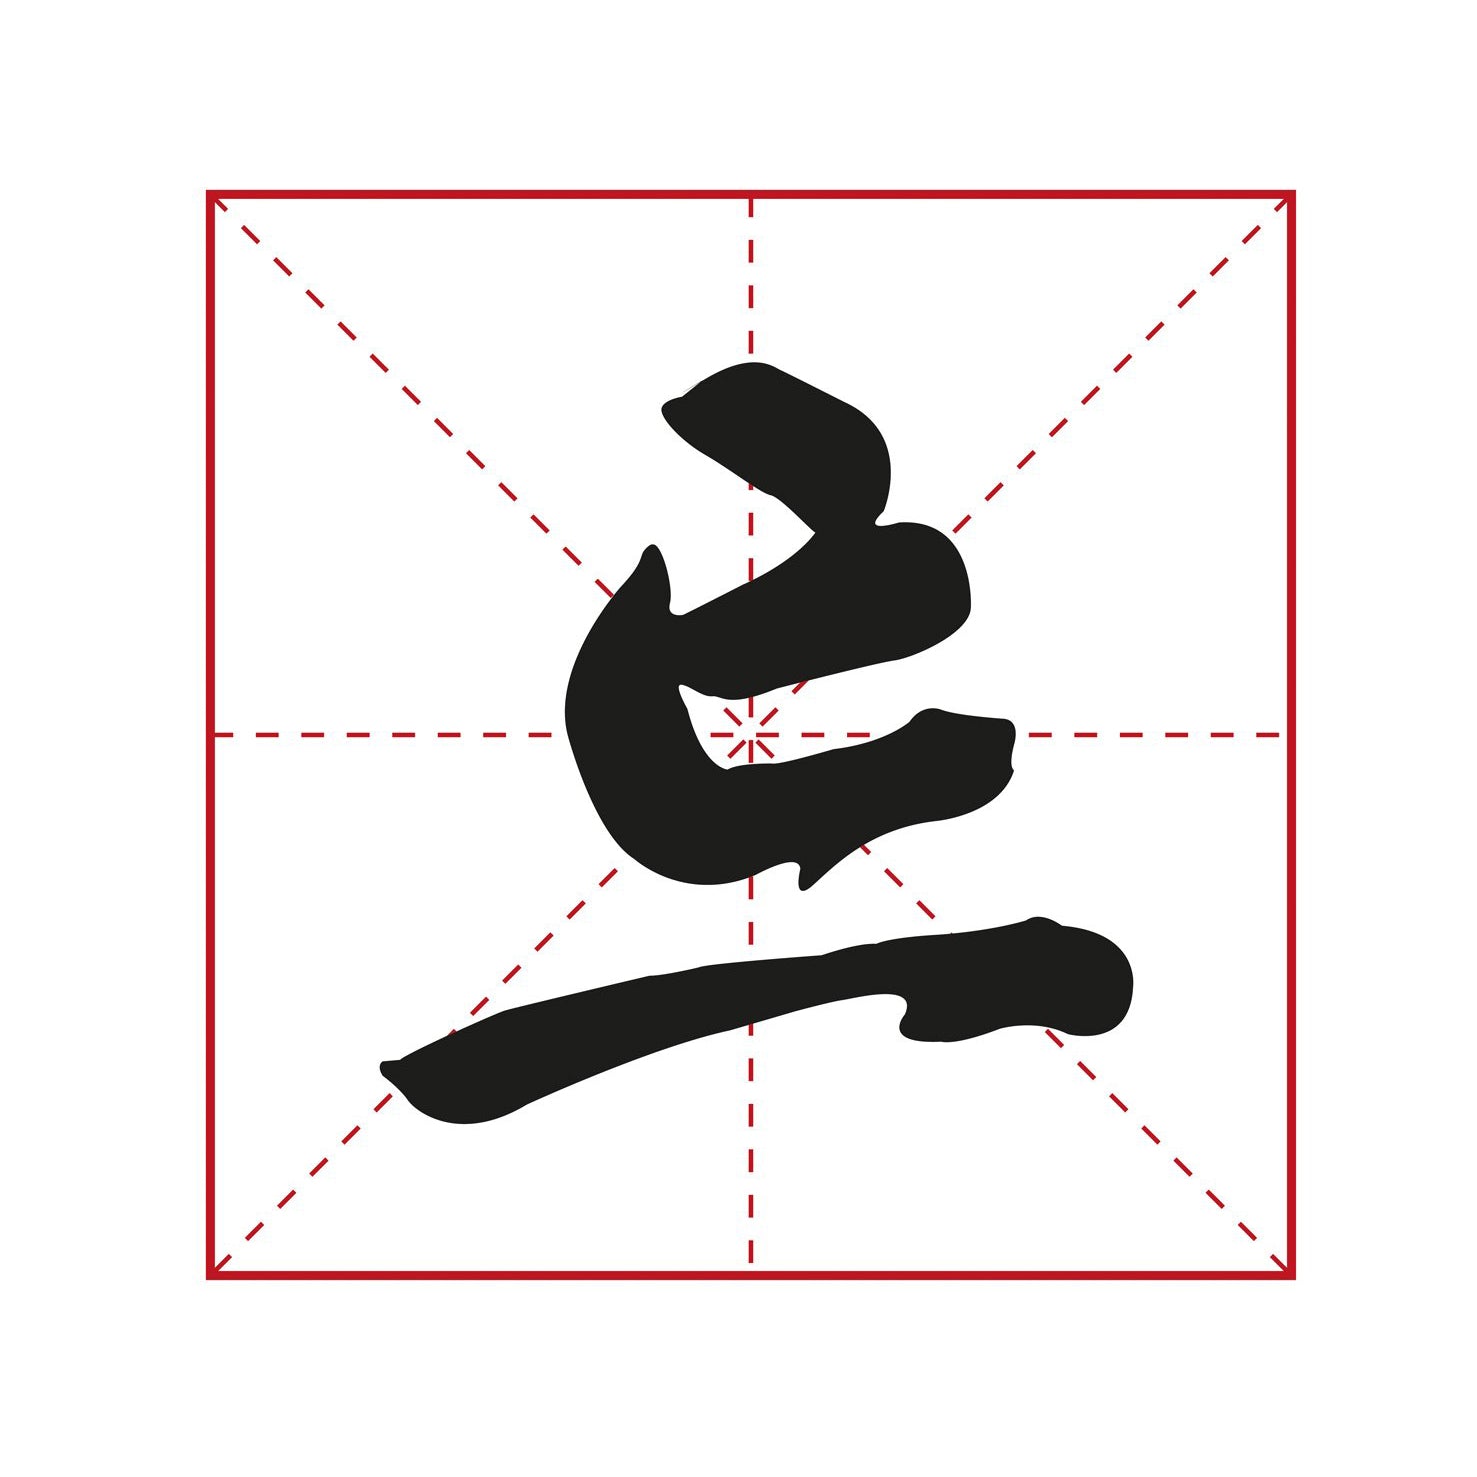 illustration of a chinese character written by the great monk calligrapher zhi yong in cao shu style